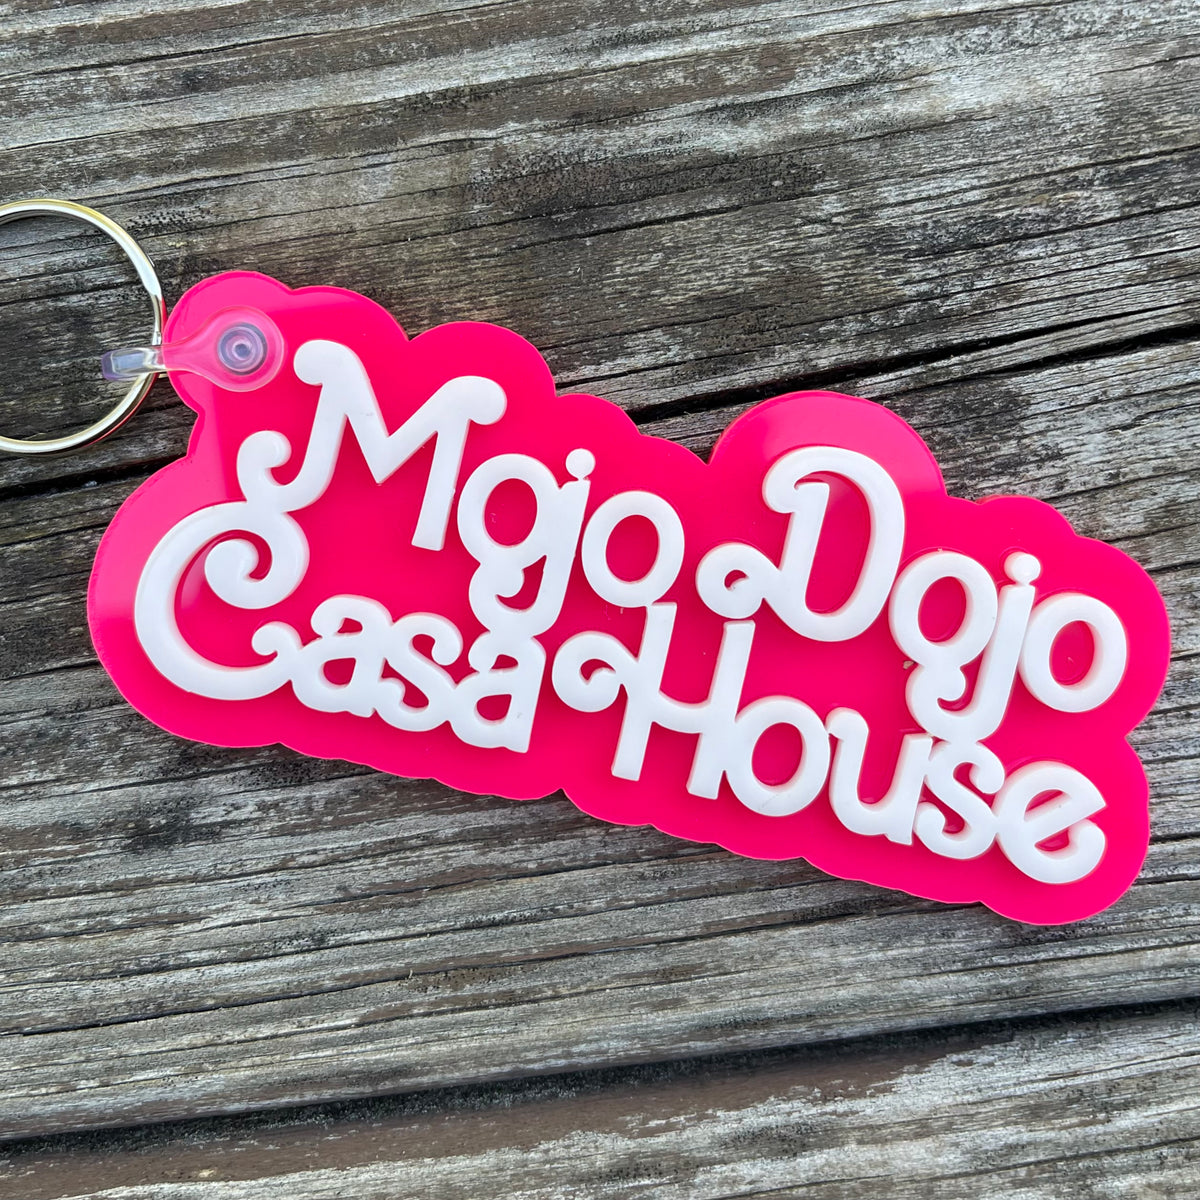 Mojo Dojo Casa House Keychain | With or Without Tassel